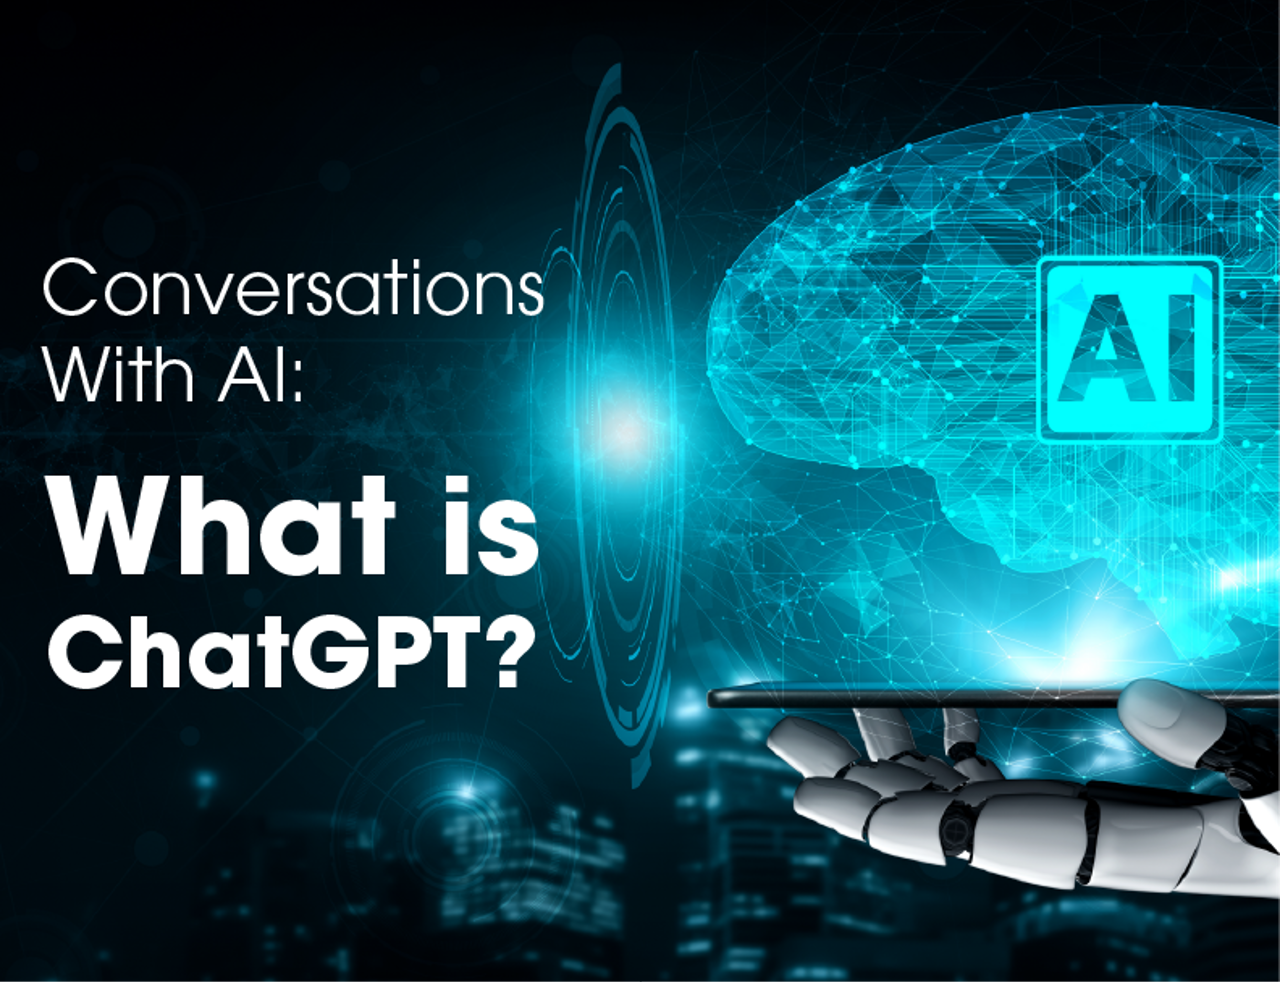 Conversations With AI: What is ChatGPT?